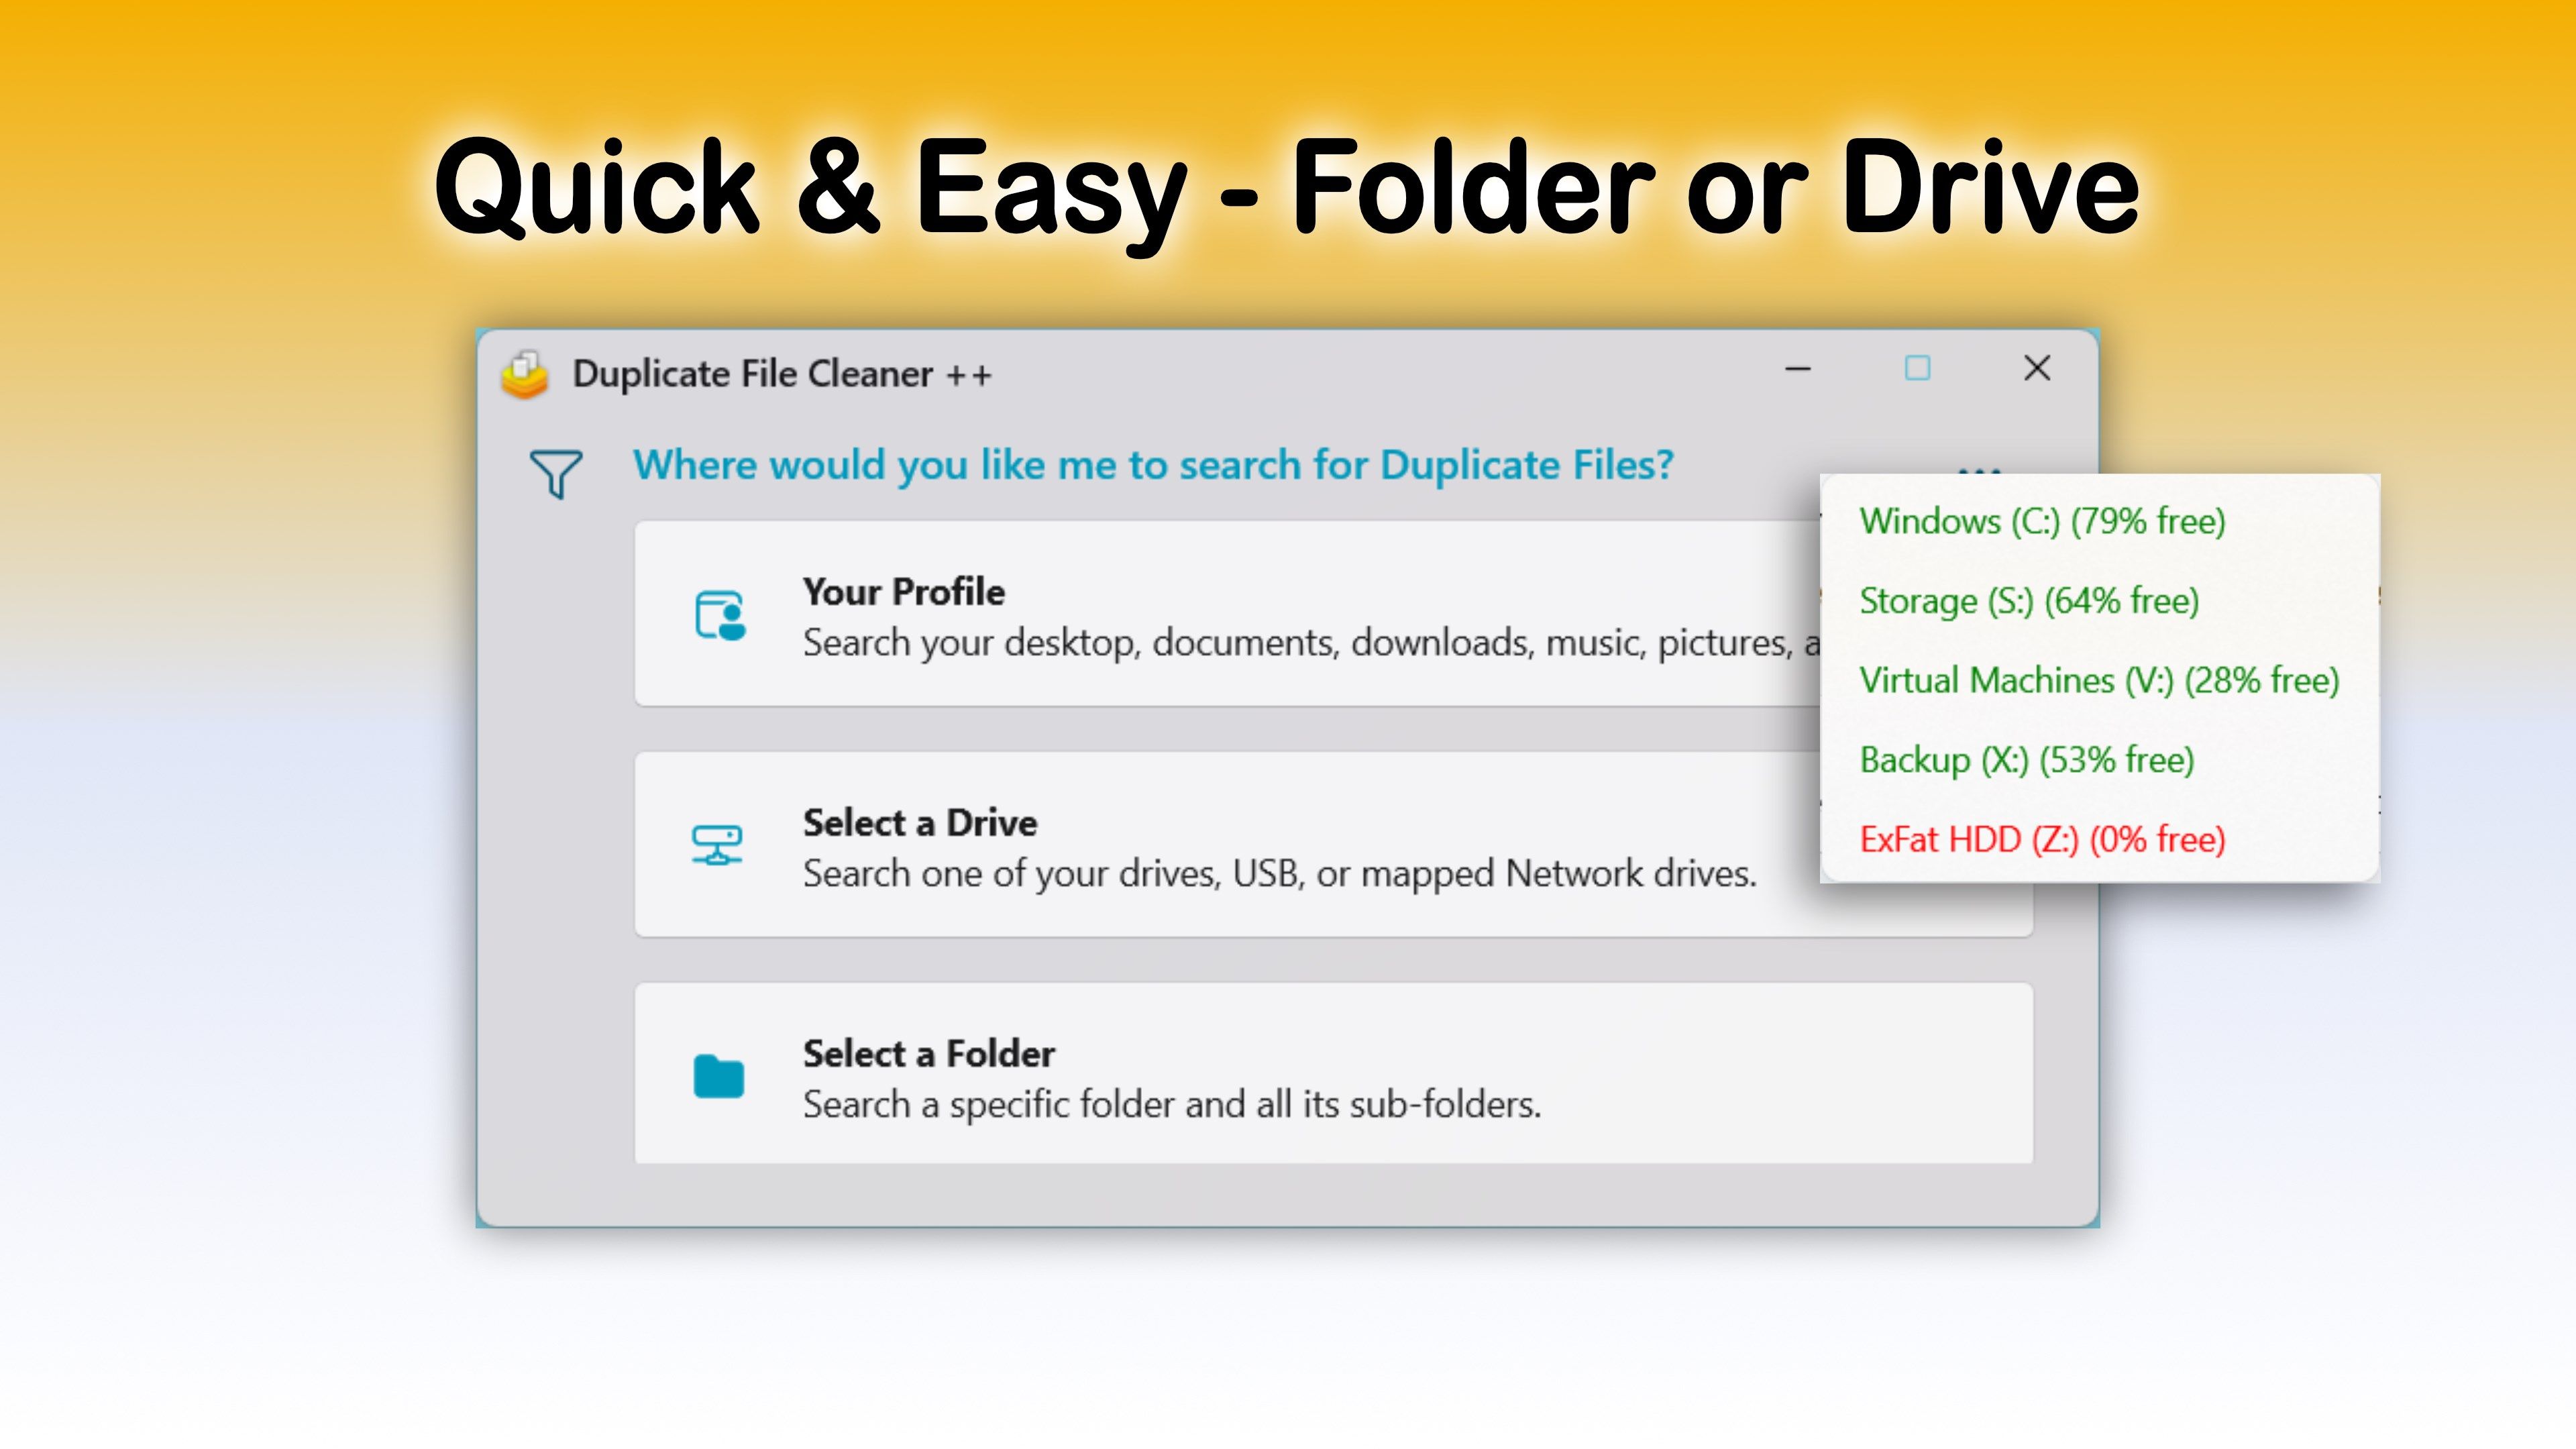 Duplicate Cleaner - A Duplicate File Finder and Cleaner